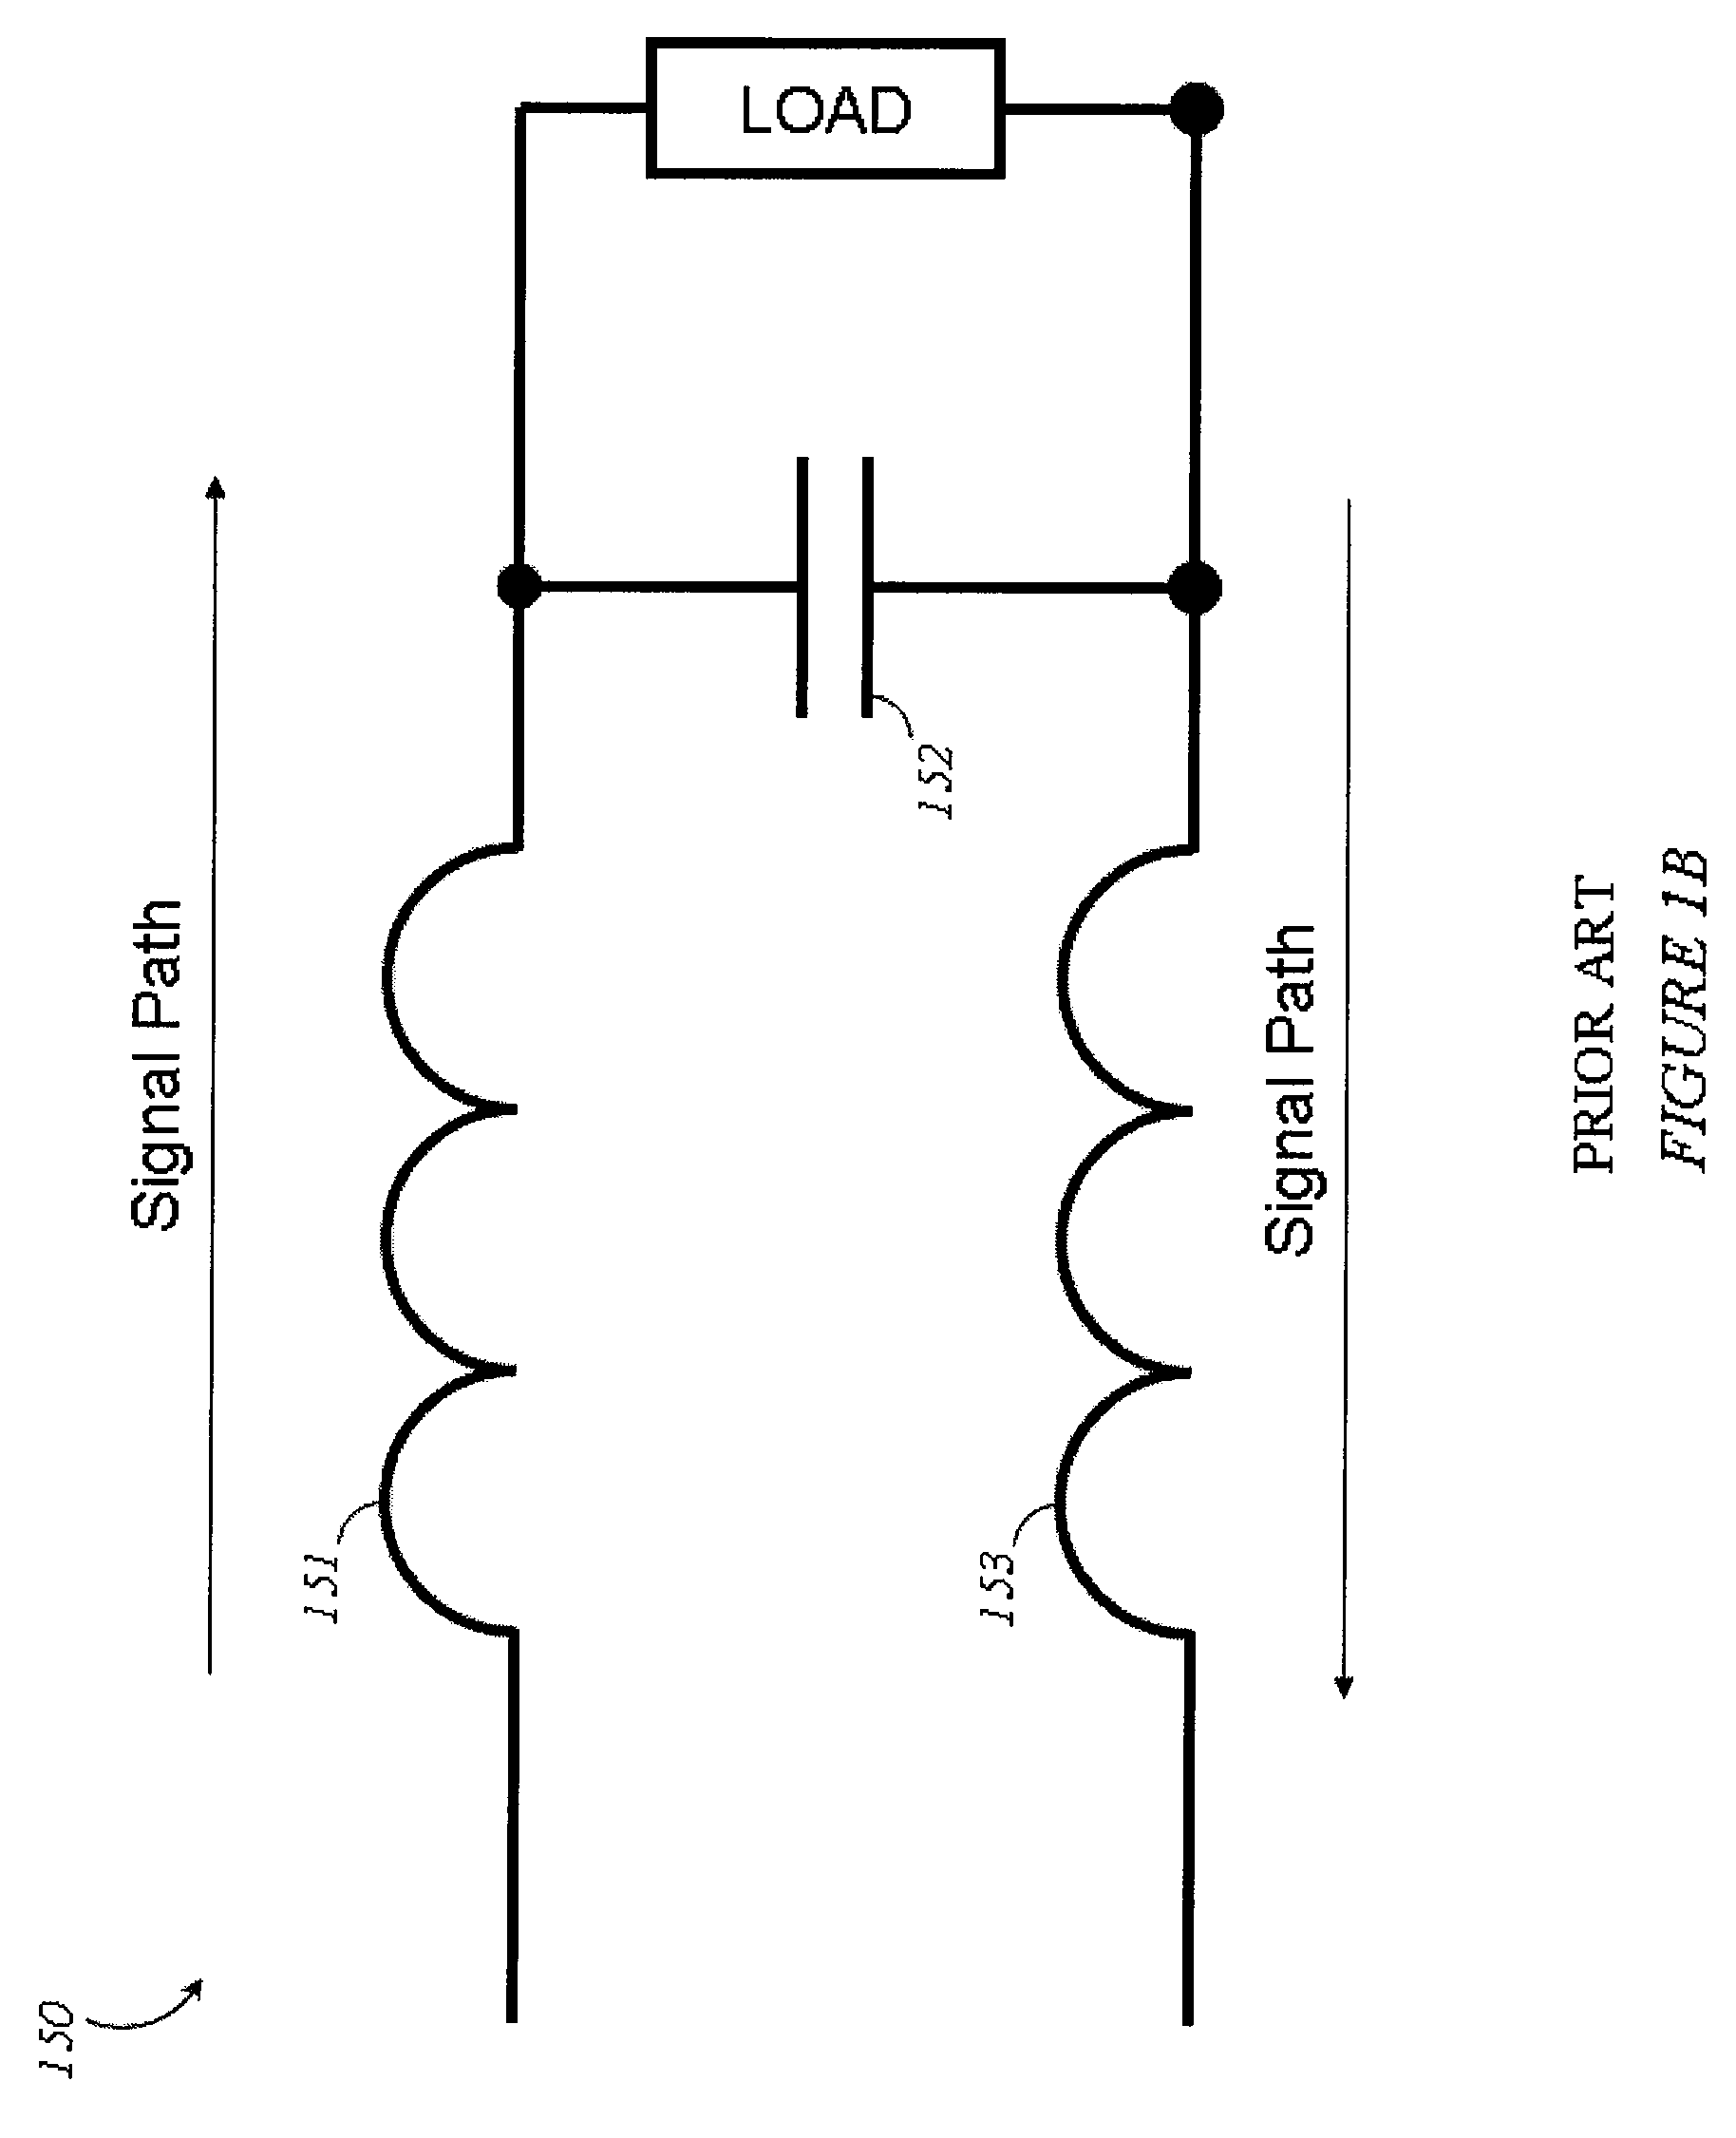 Systems, methods, and apparatus for electrical filters and input/output systems